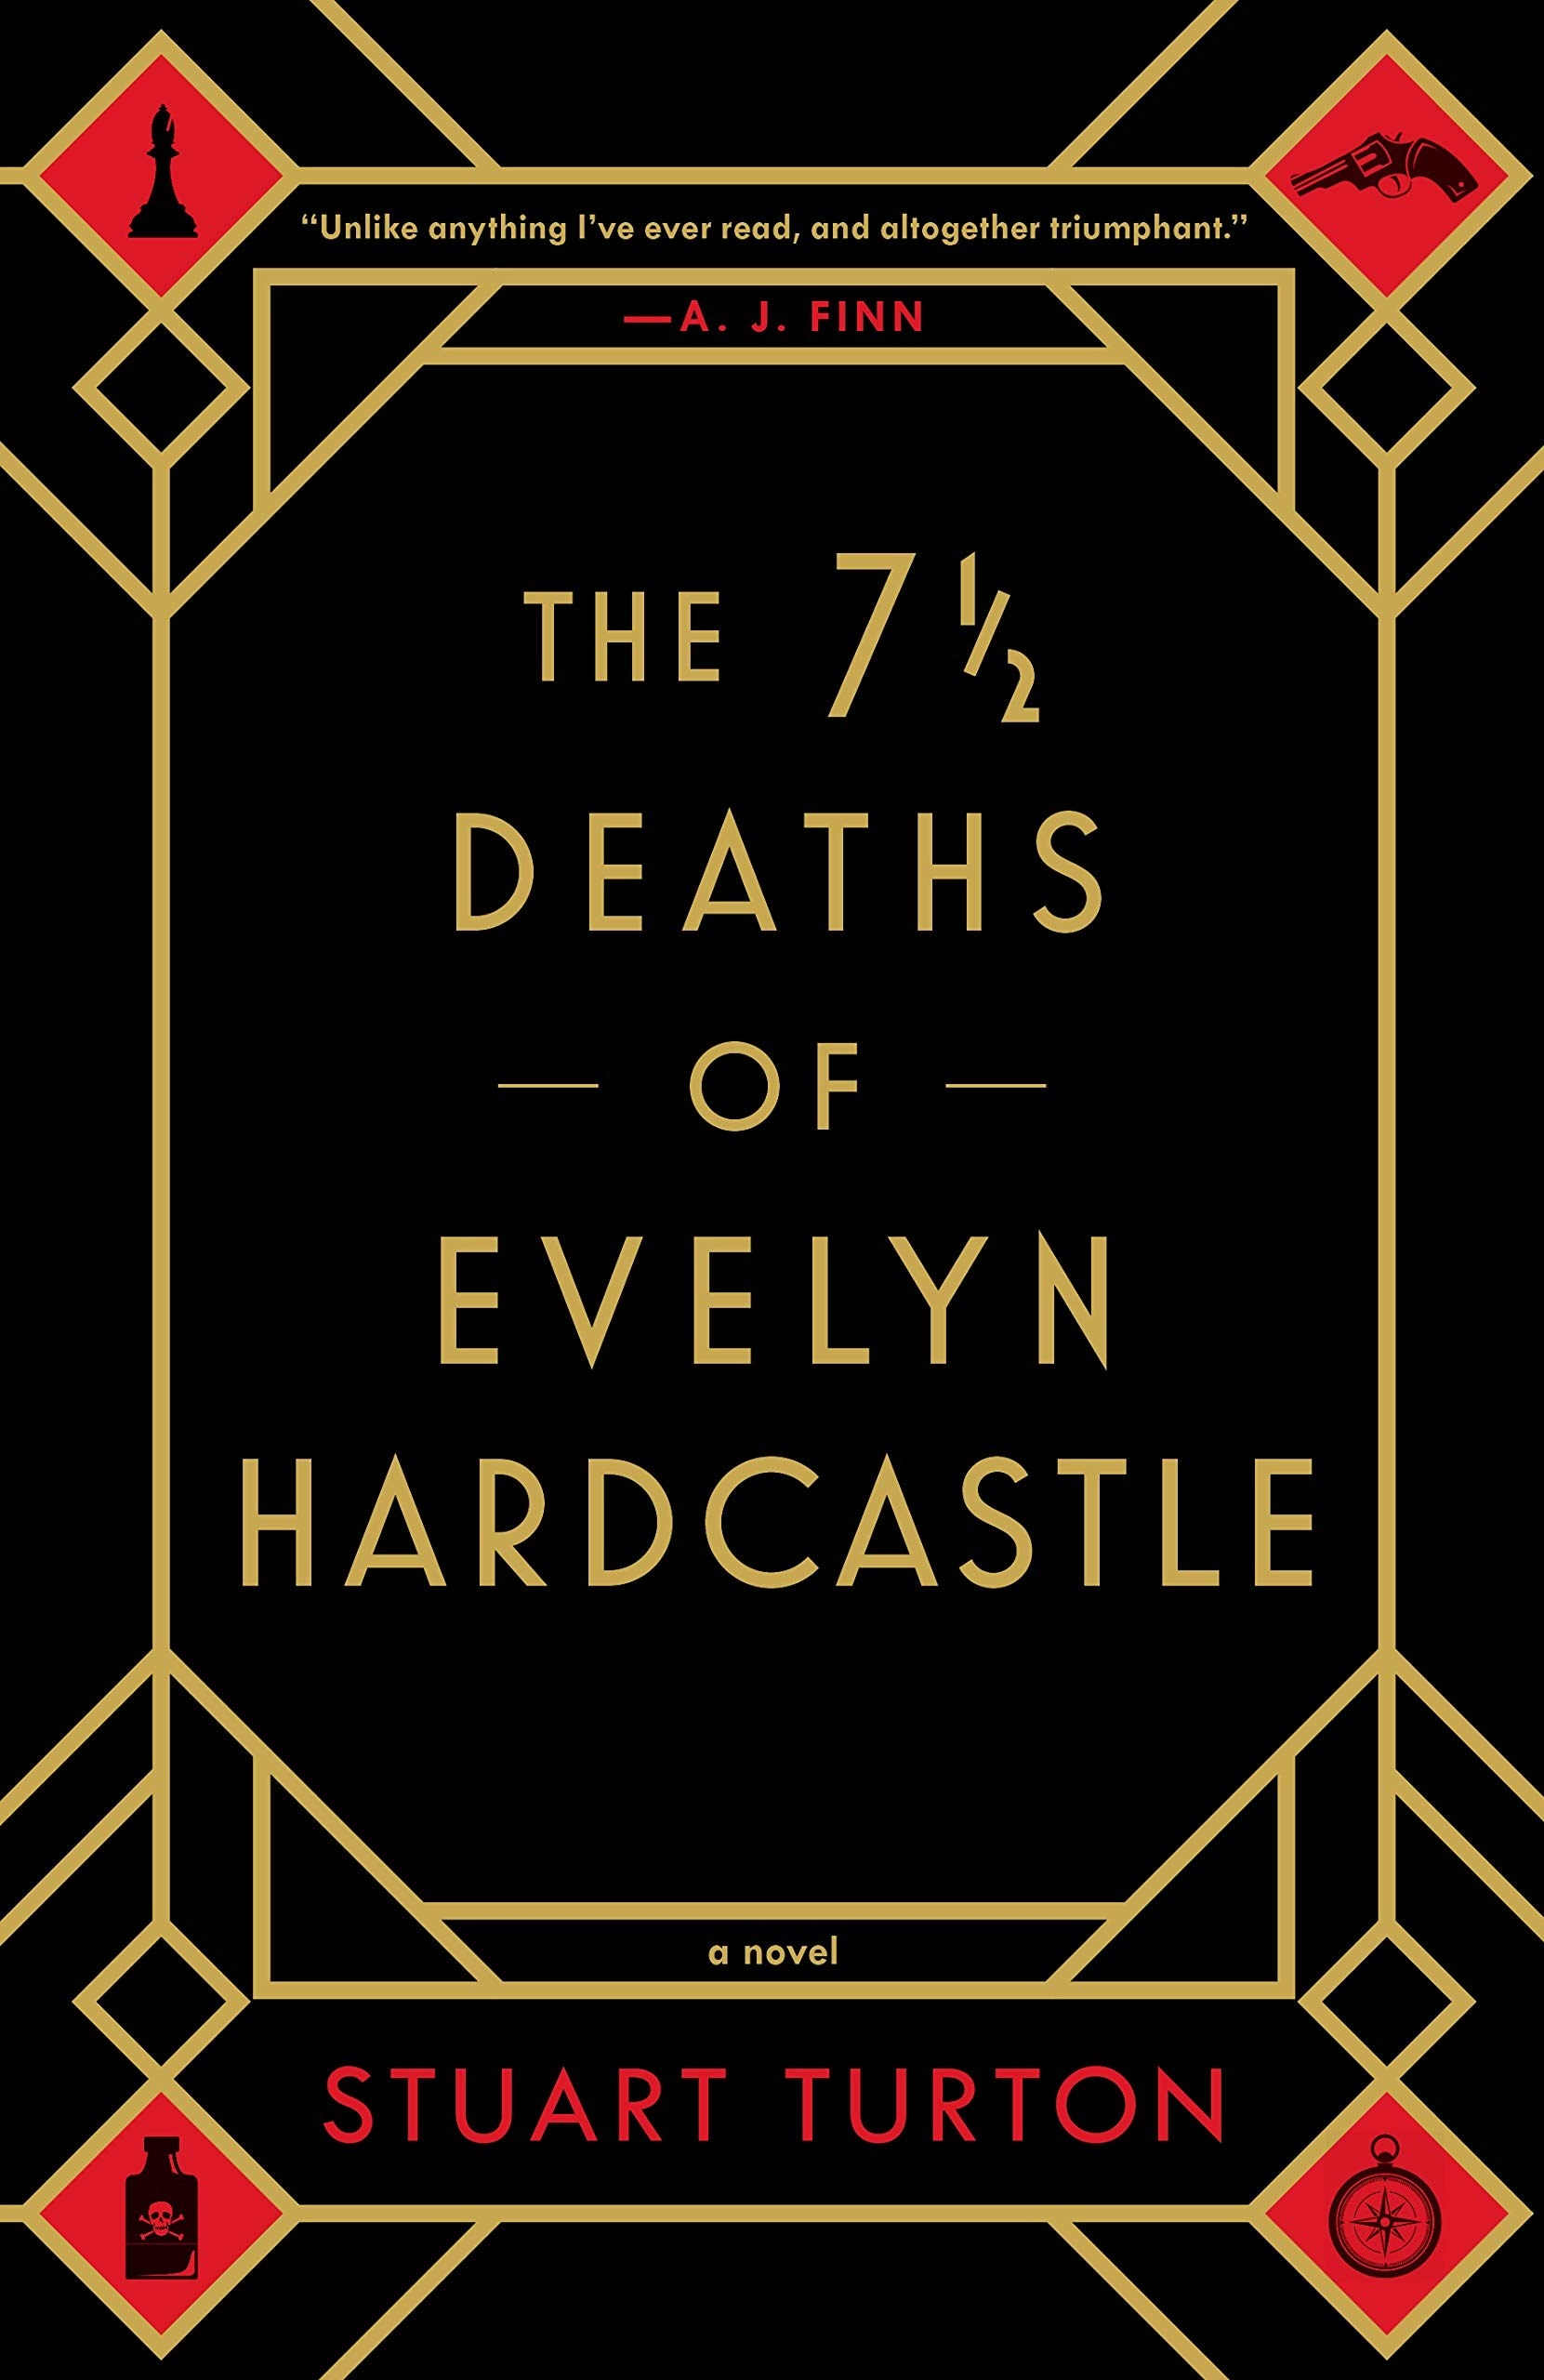 The cover of &quot;The 7 1/2 Deaths of Evelyn Hardcastle&quot; by Stuart Turton.